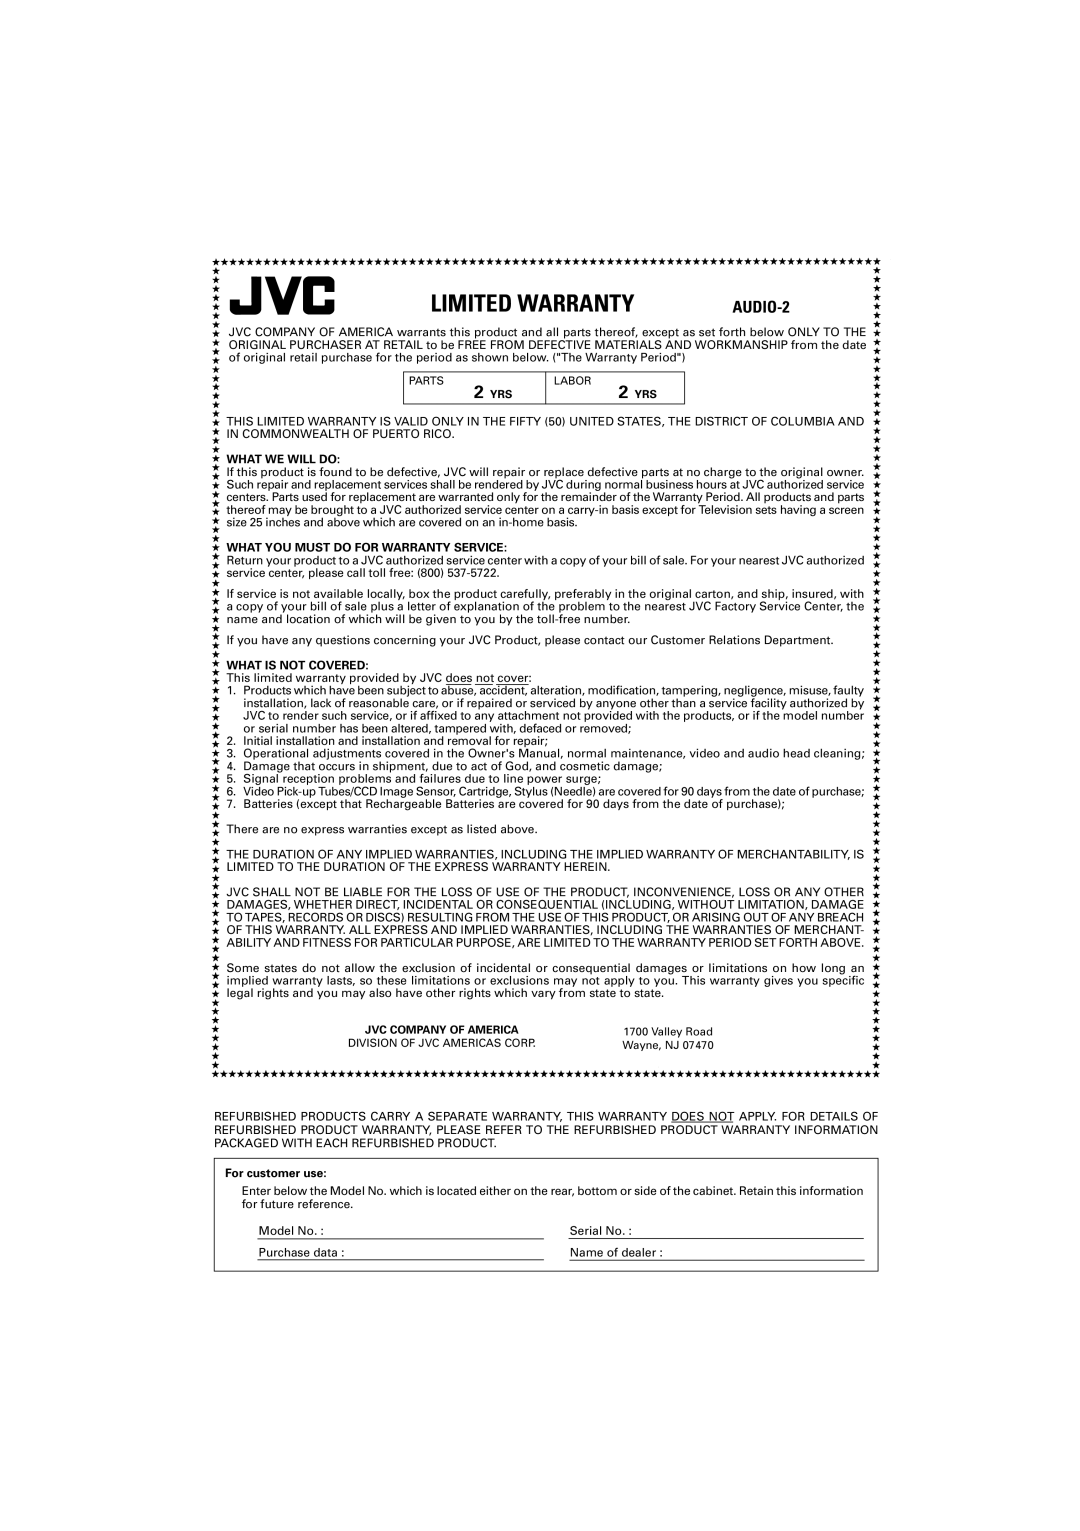 JVC RX-6042S manual LIMITED WARRANTYAUDIO-2, What We Will Do, What You Must Do For Warranty Service, What Is Not Covered 